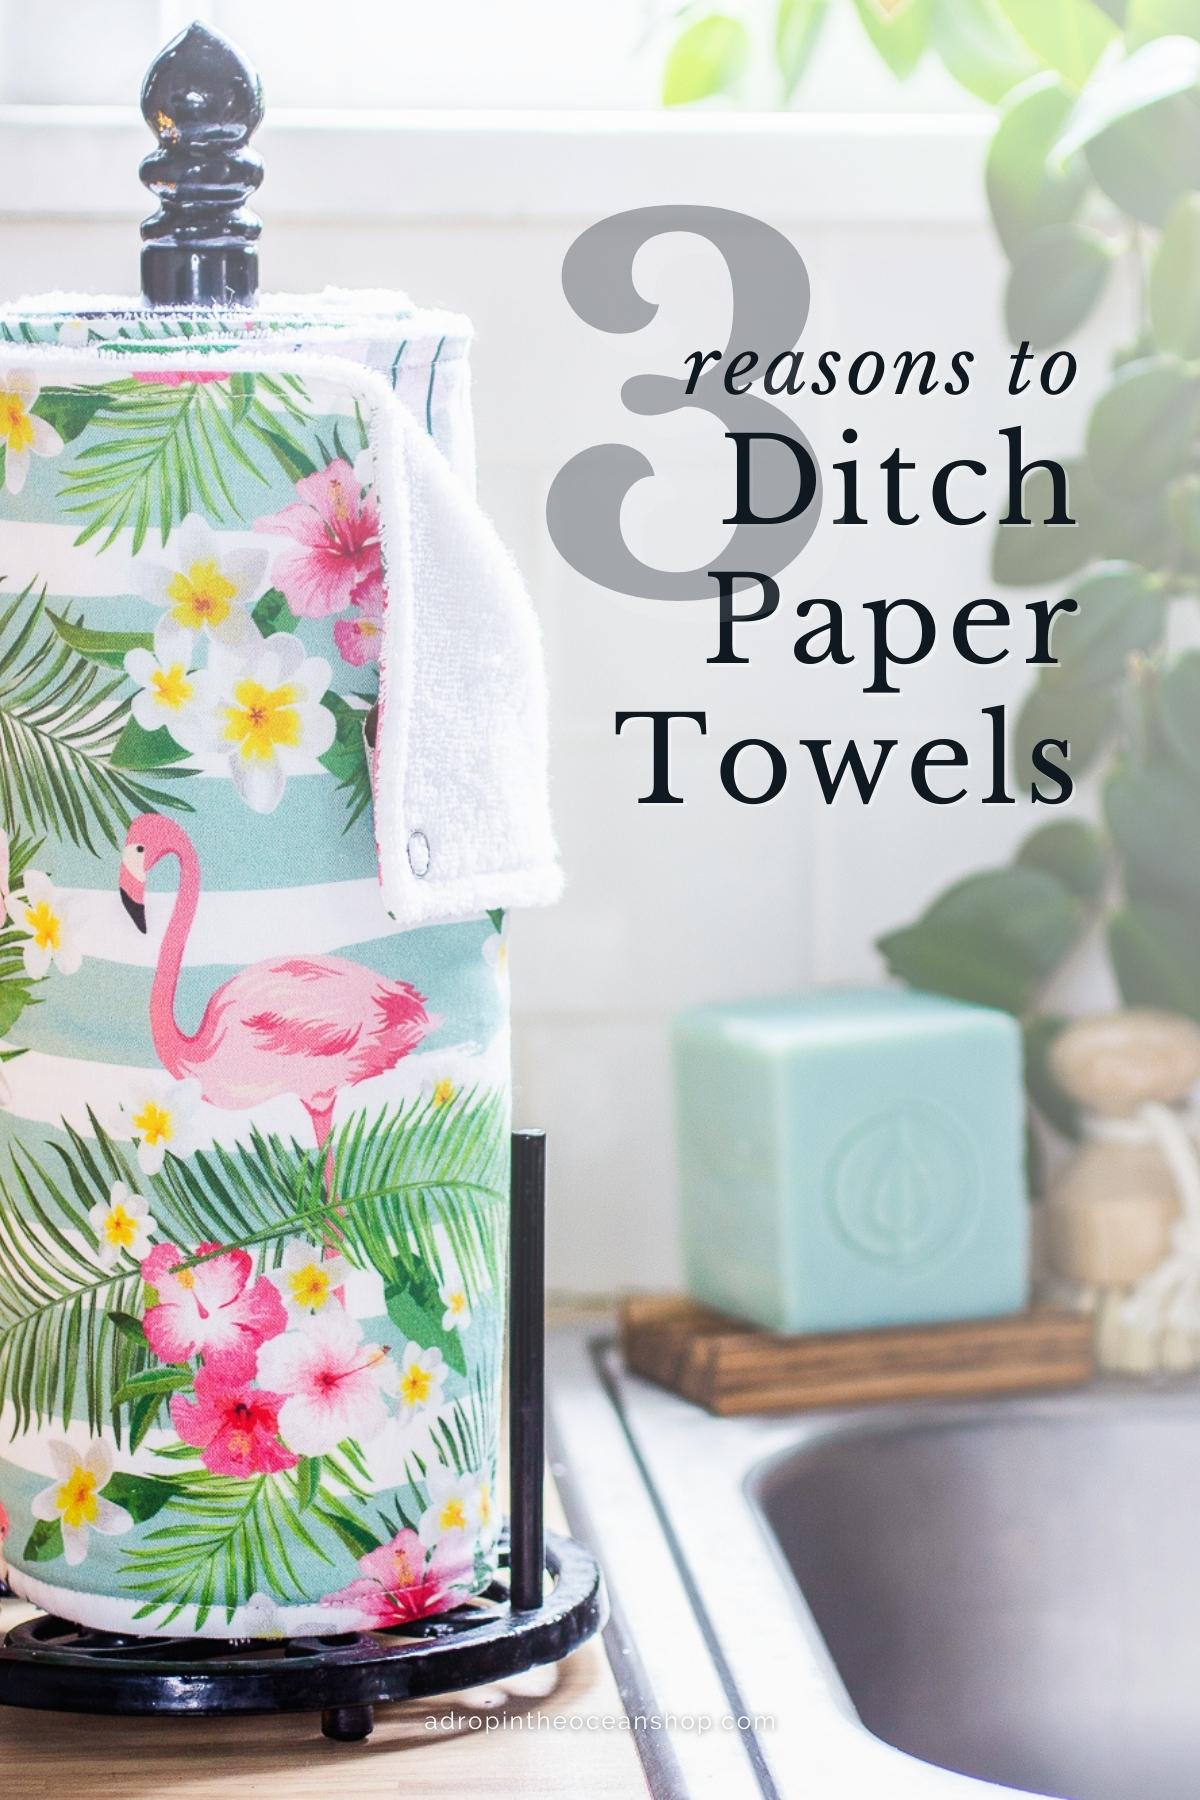 3 Reasons to Ditch Paper Towels – A Drop in the Ocean